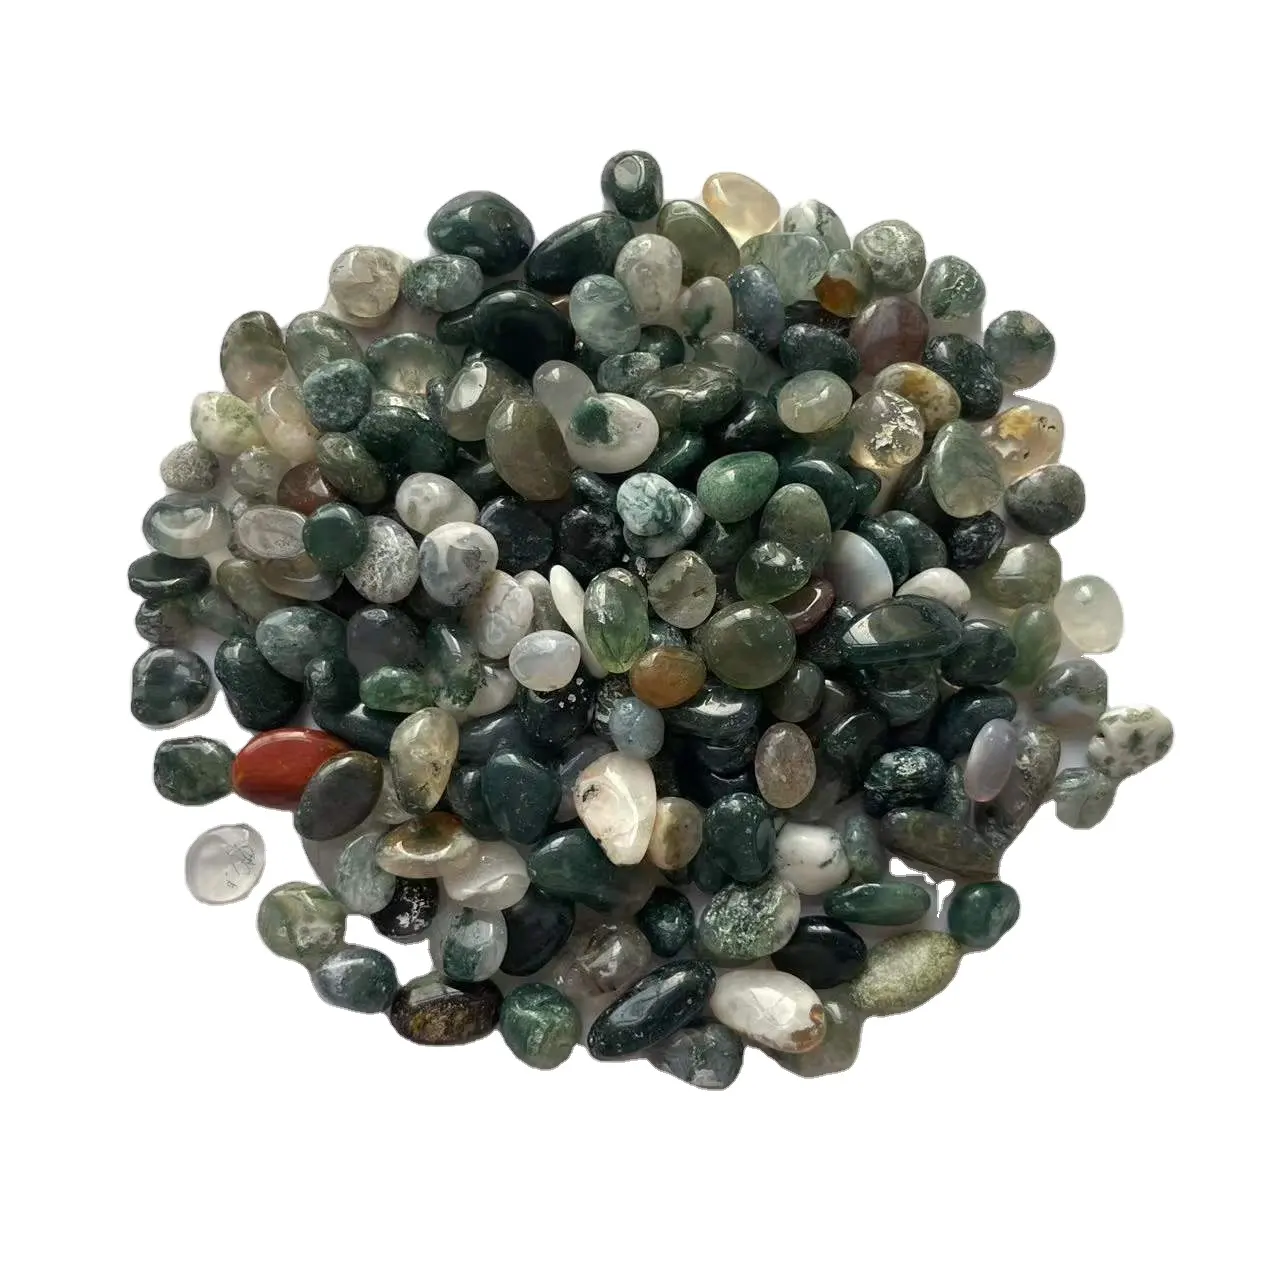 Wholesale price high quality crystal dendritic quartz stone moss agate tumbled stones